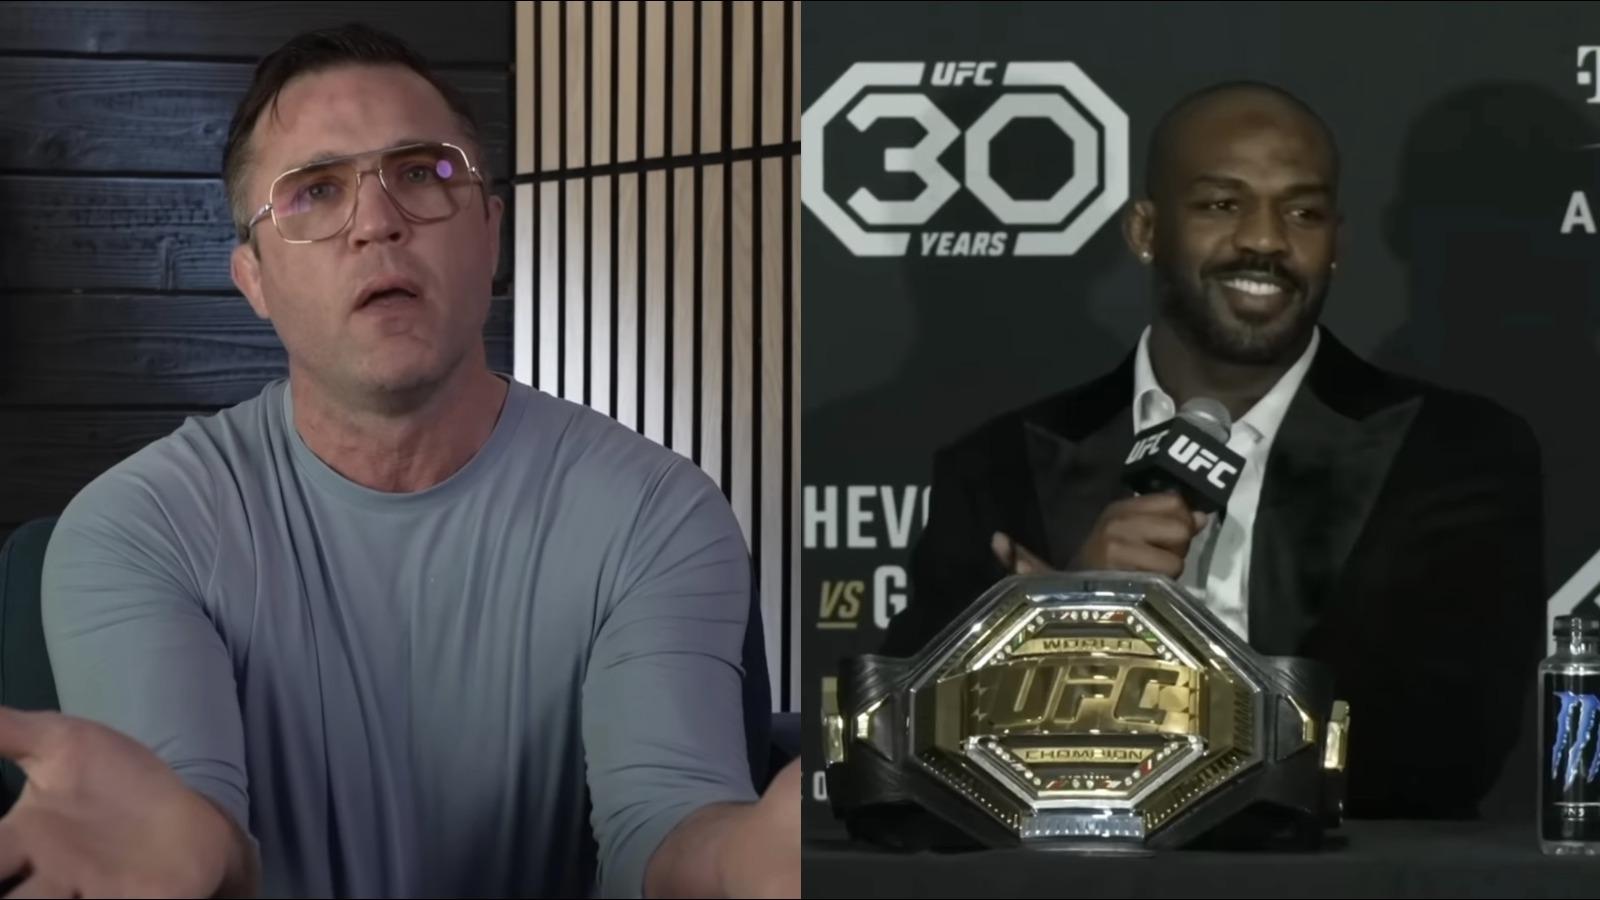 Jon Jones recently announced that he was offered the UFC 300 main event and former rival Chael Sonnen took exception to the statement